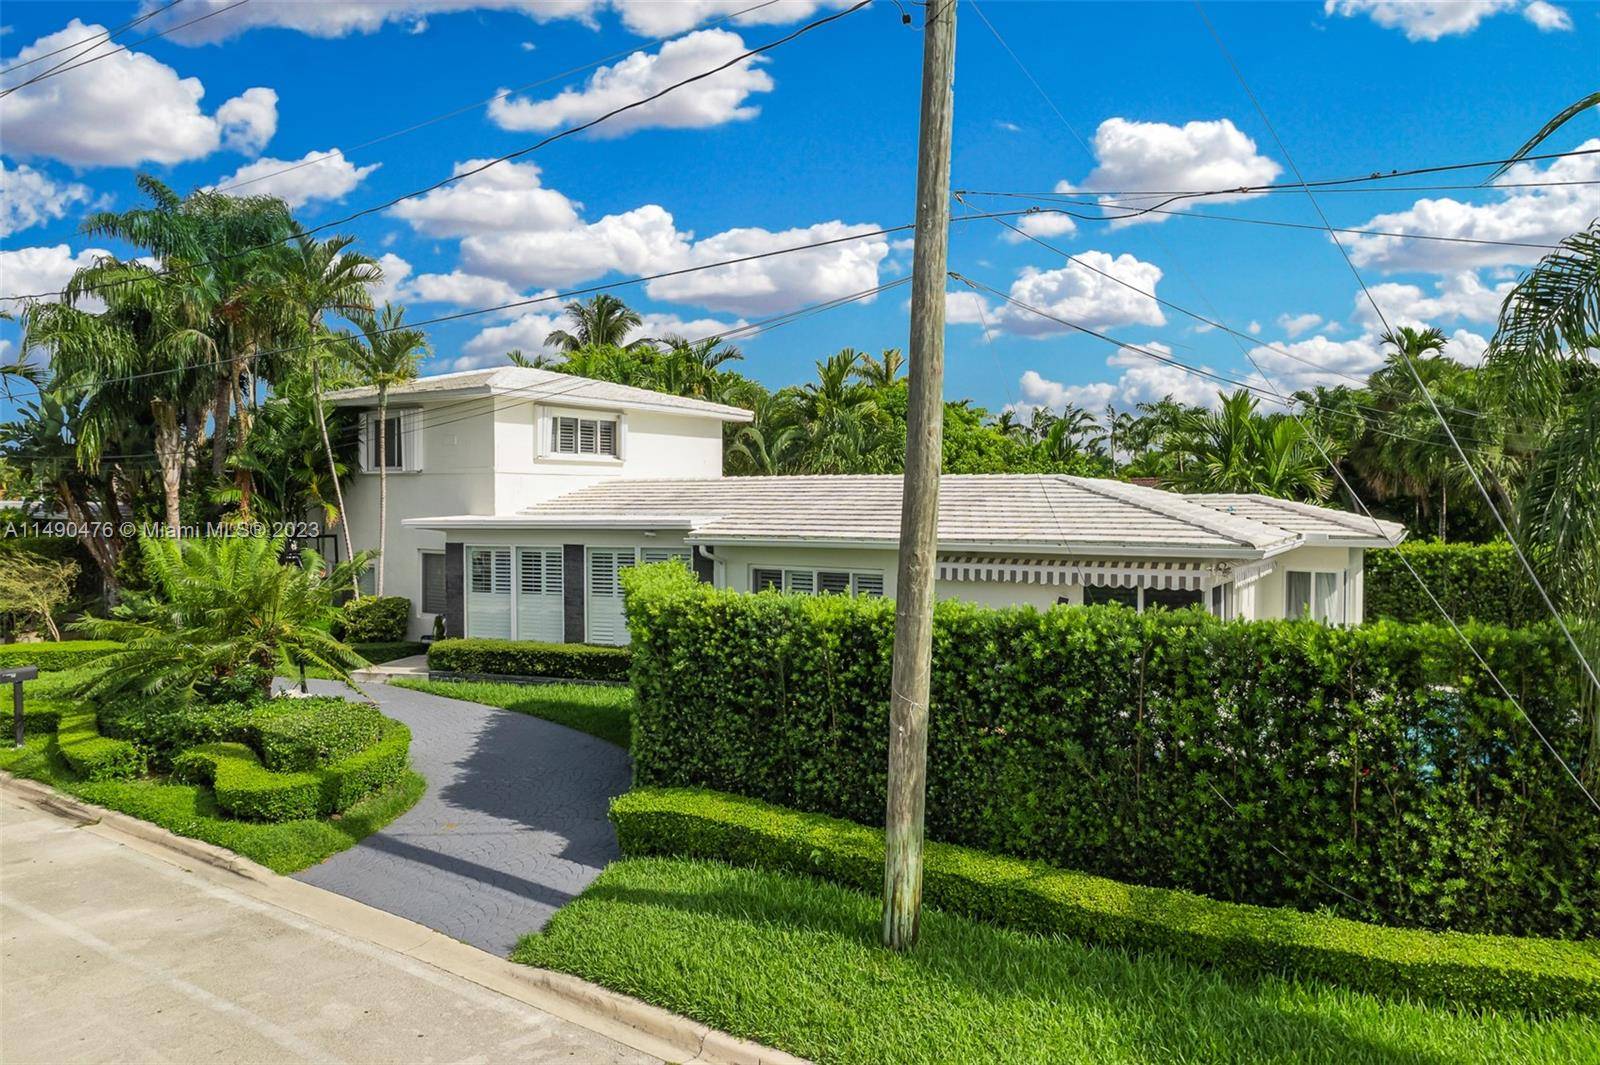 Discover the allure of Surfside living in this prime South Florida home.